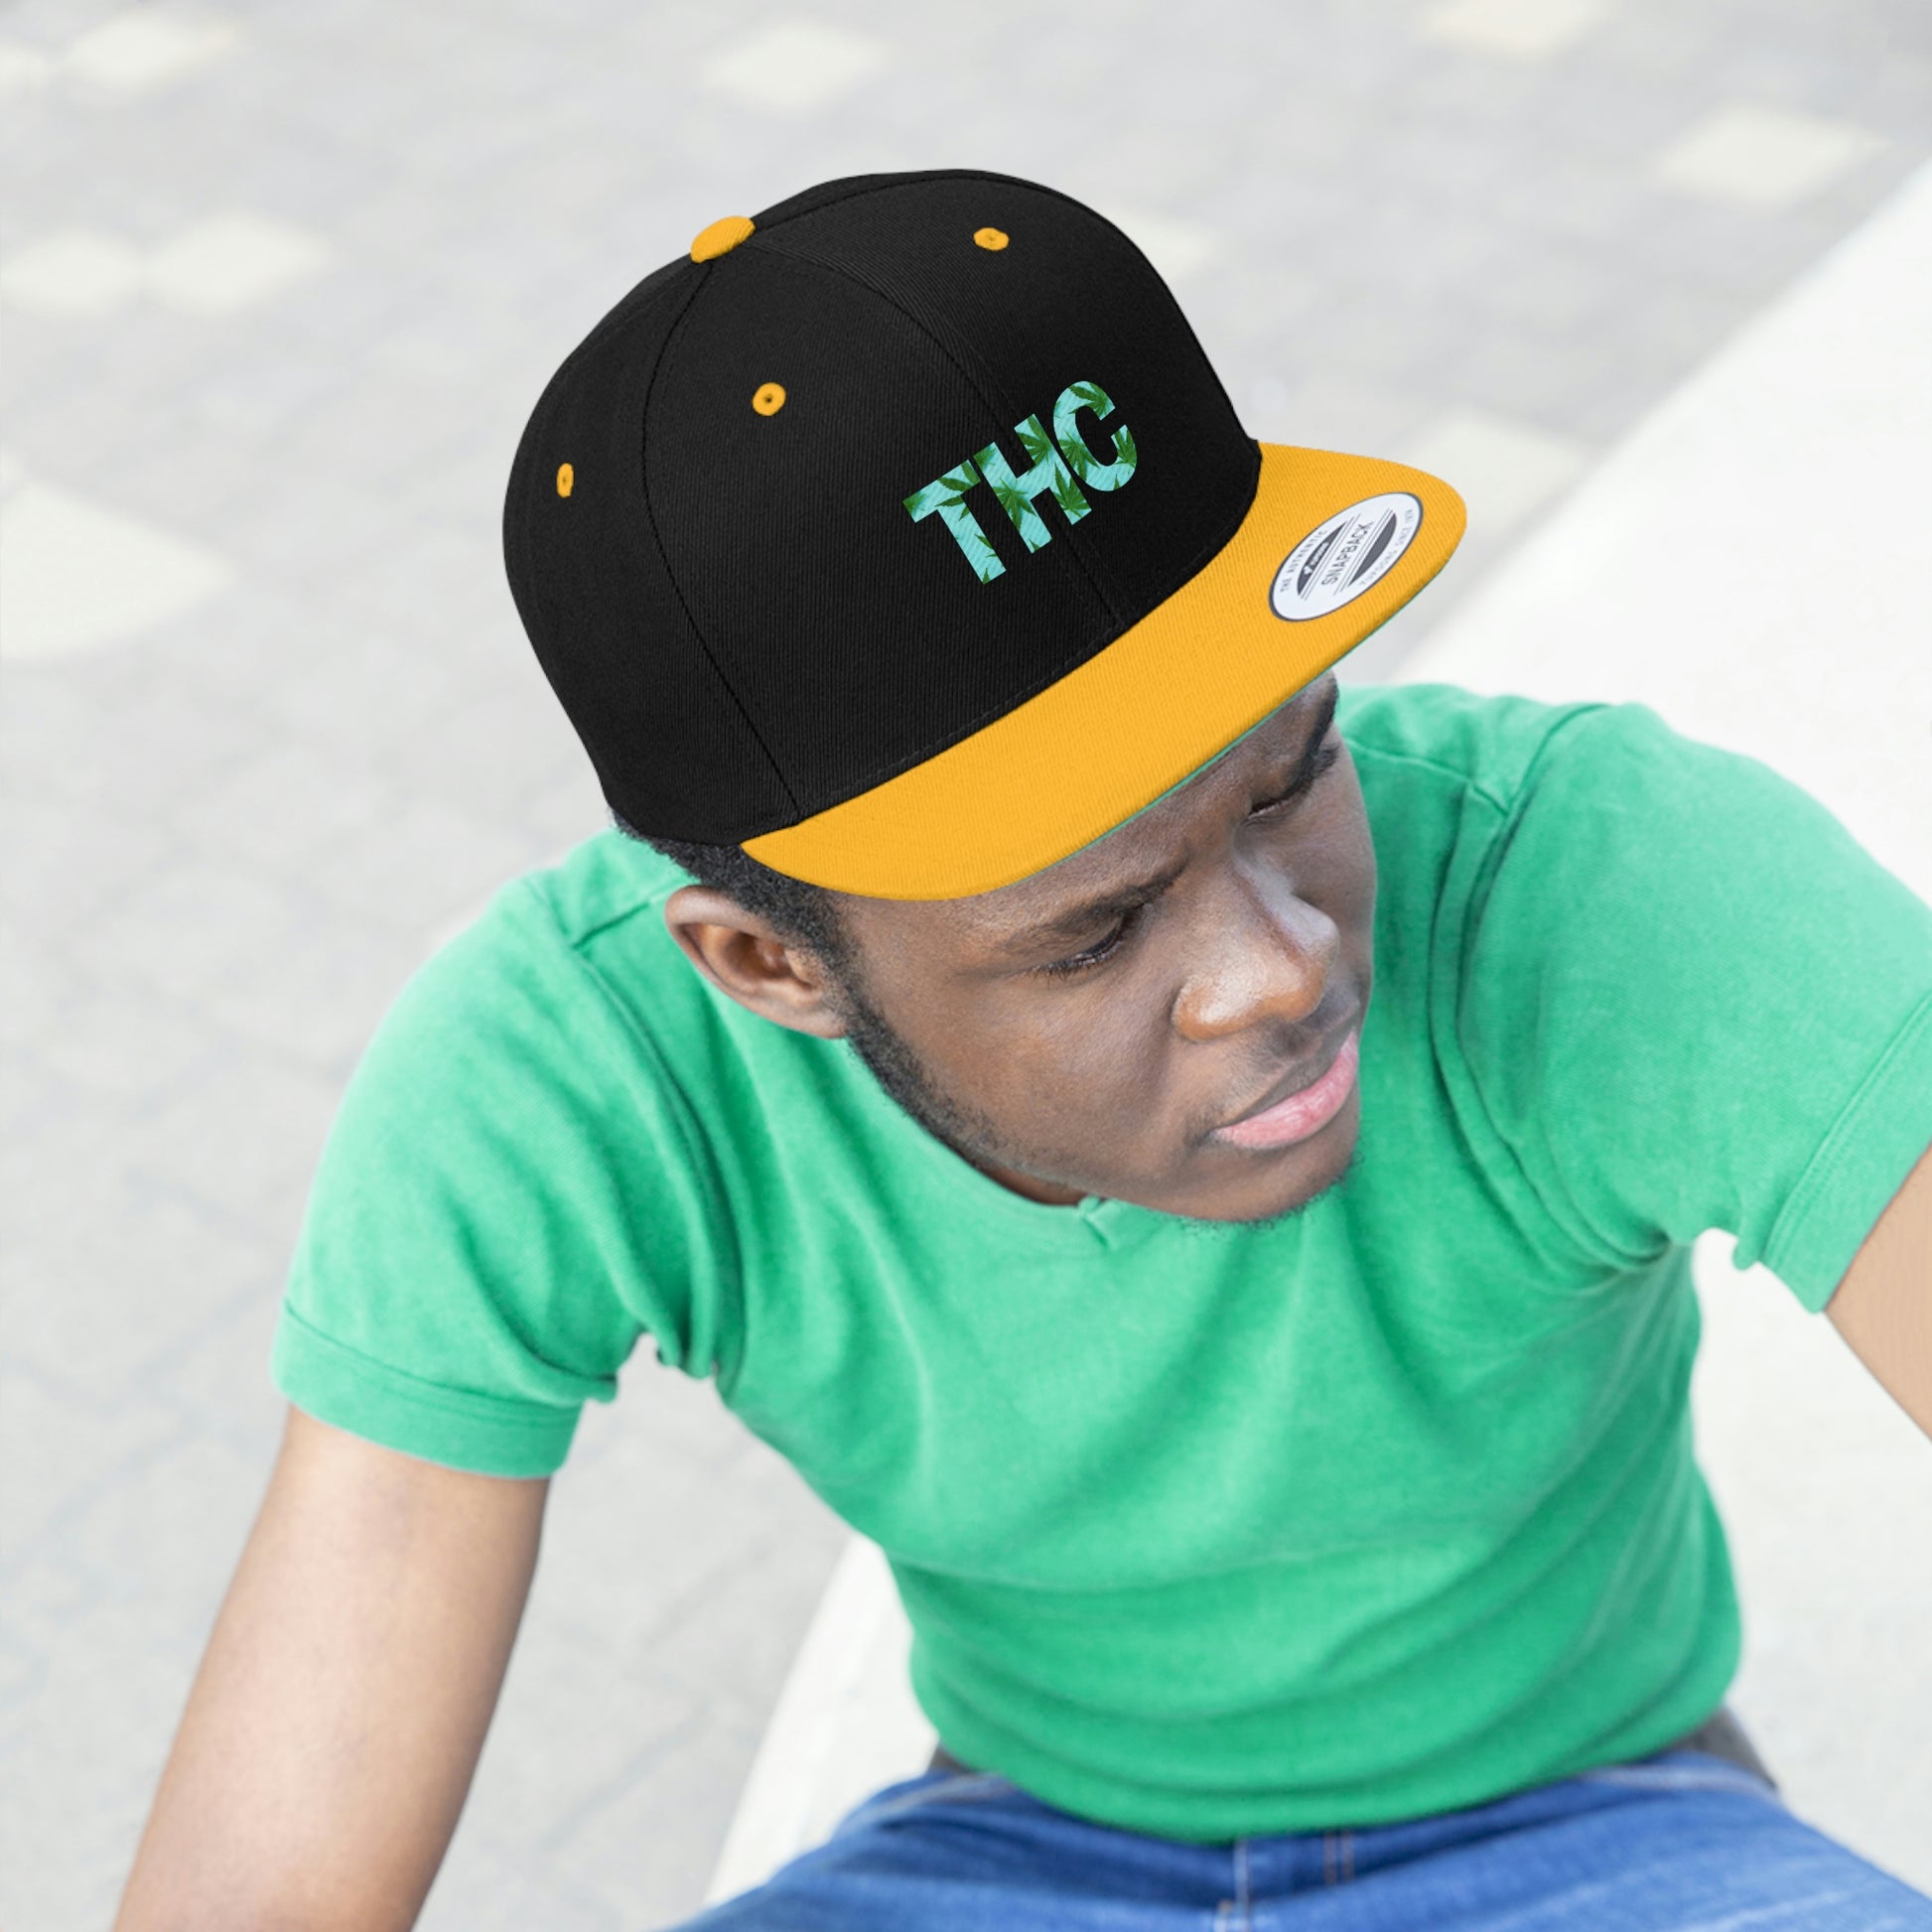 The black and gold THC Snapback Hat color way with green marijuana leaves worn by a young man in a green shirt